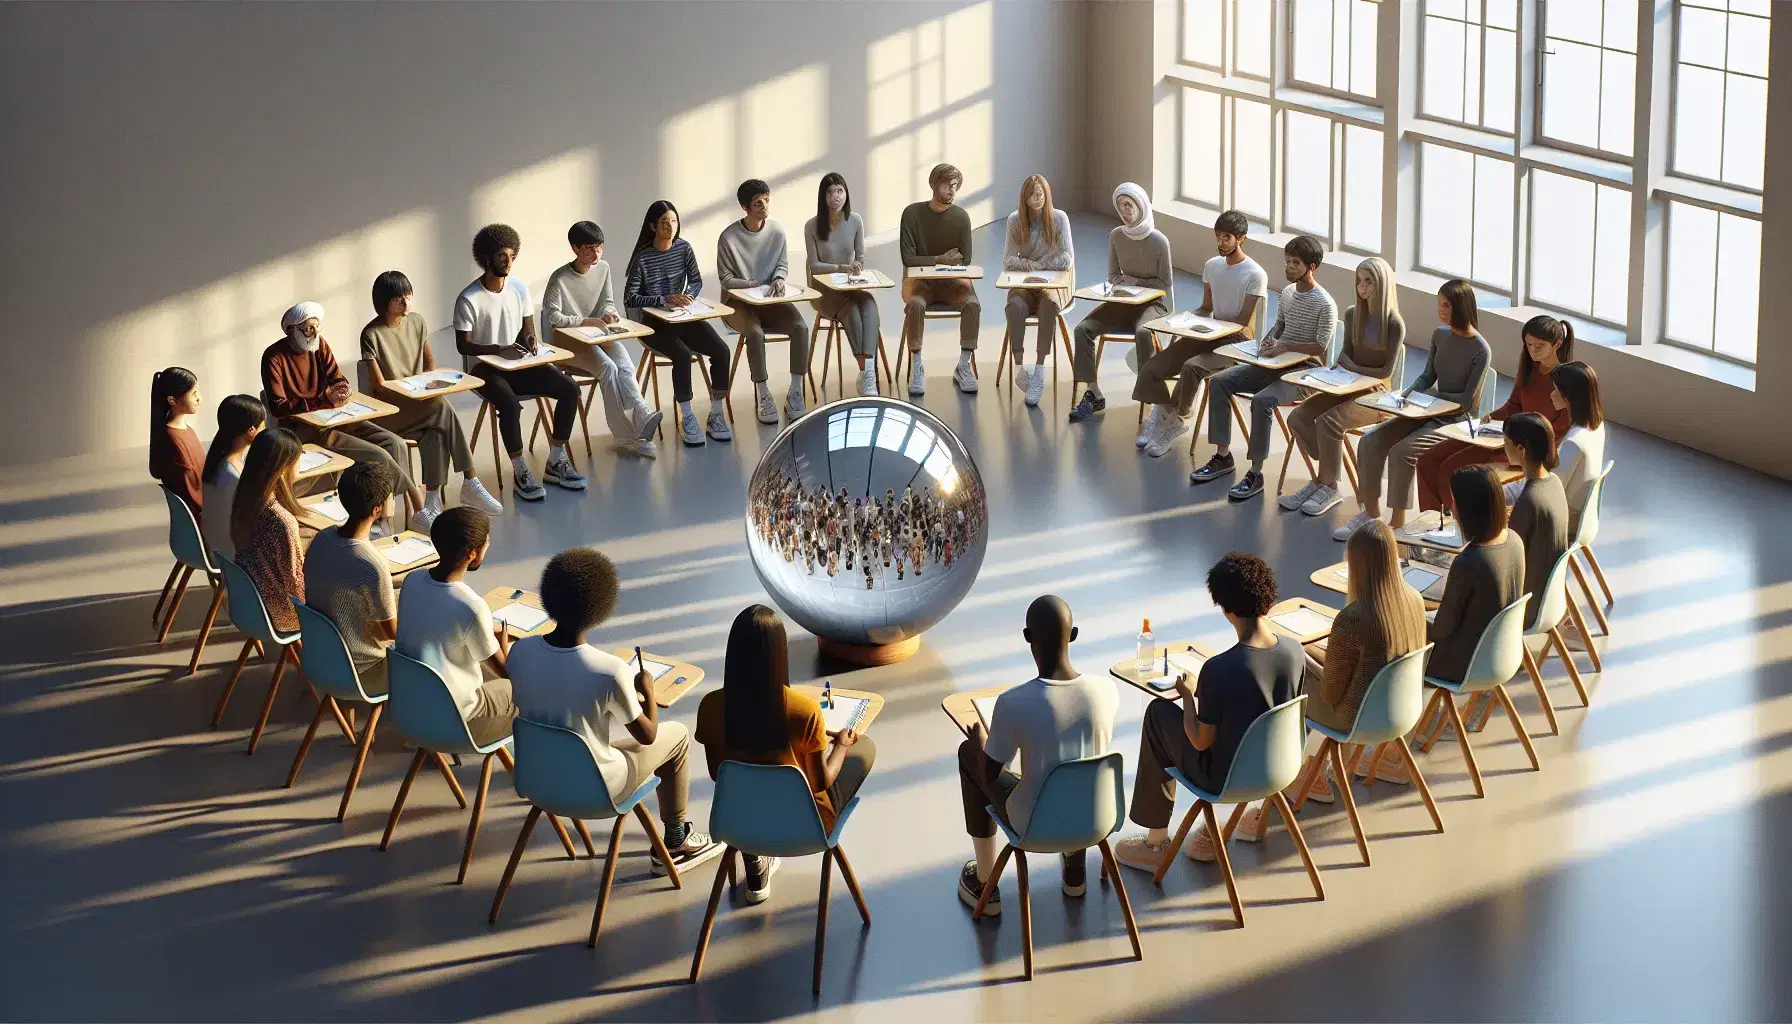 Group of multiethnic students collaborate in bright classroom with mini blackboards, sitting in circle around glass sphere on wooden stand.